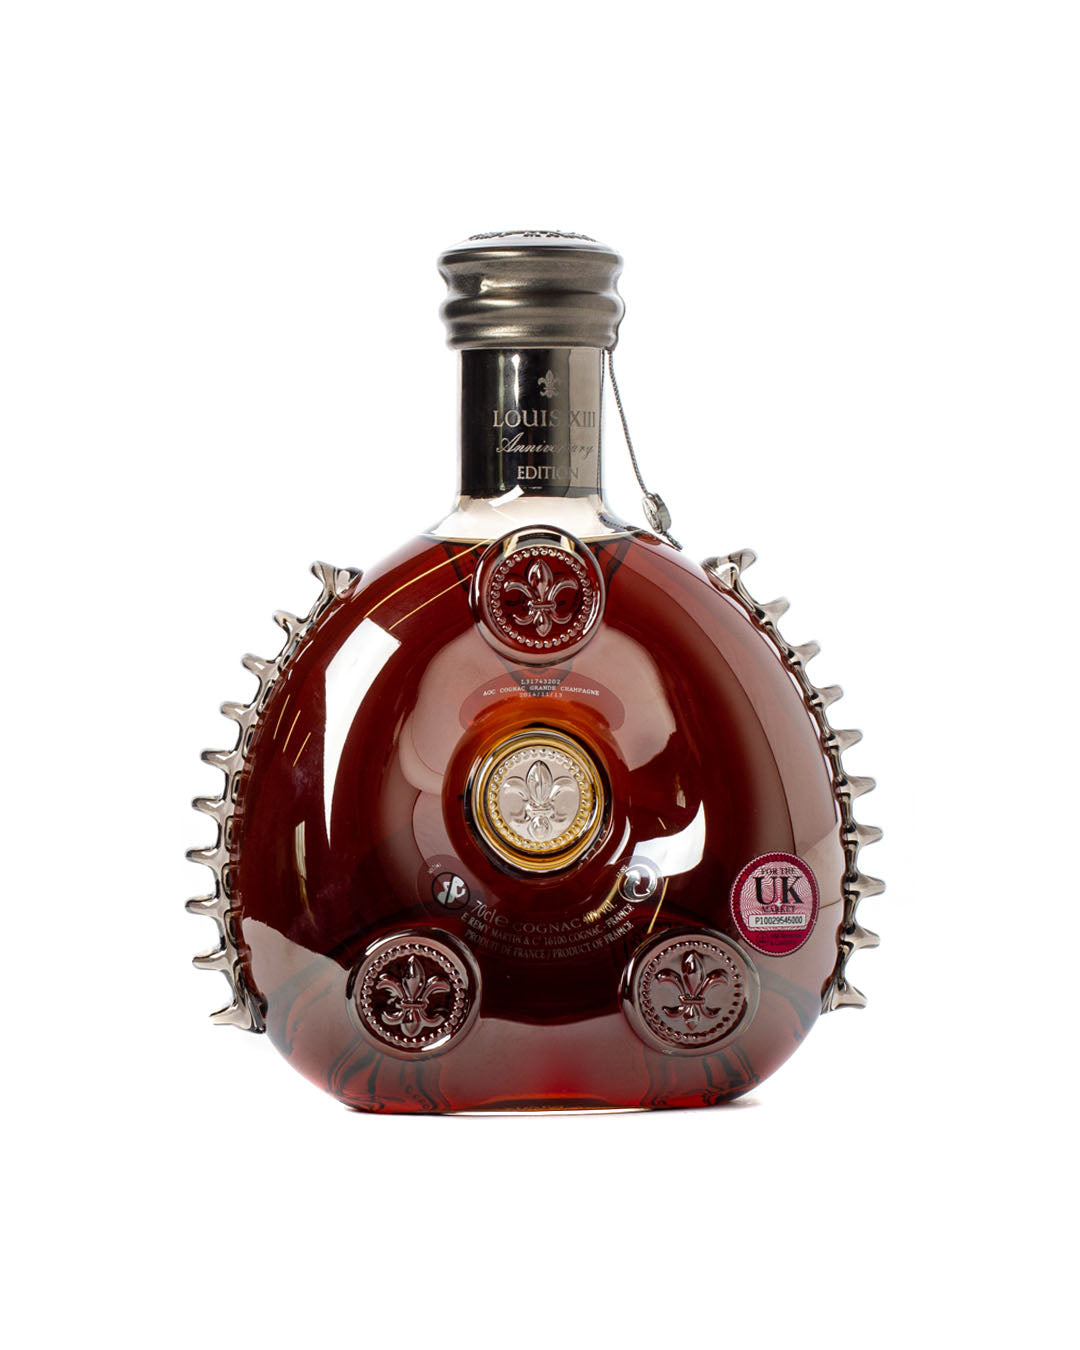 Remy Martin Louis XIII Black Pearl Cognac 100-year-old Anniversary Edition